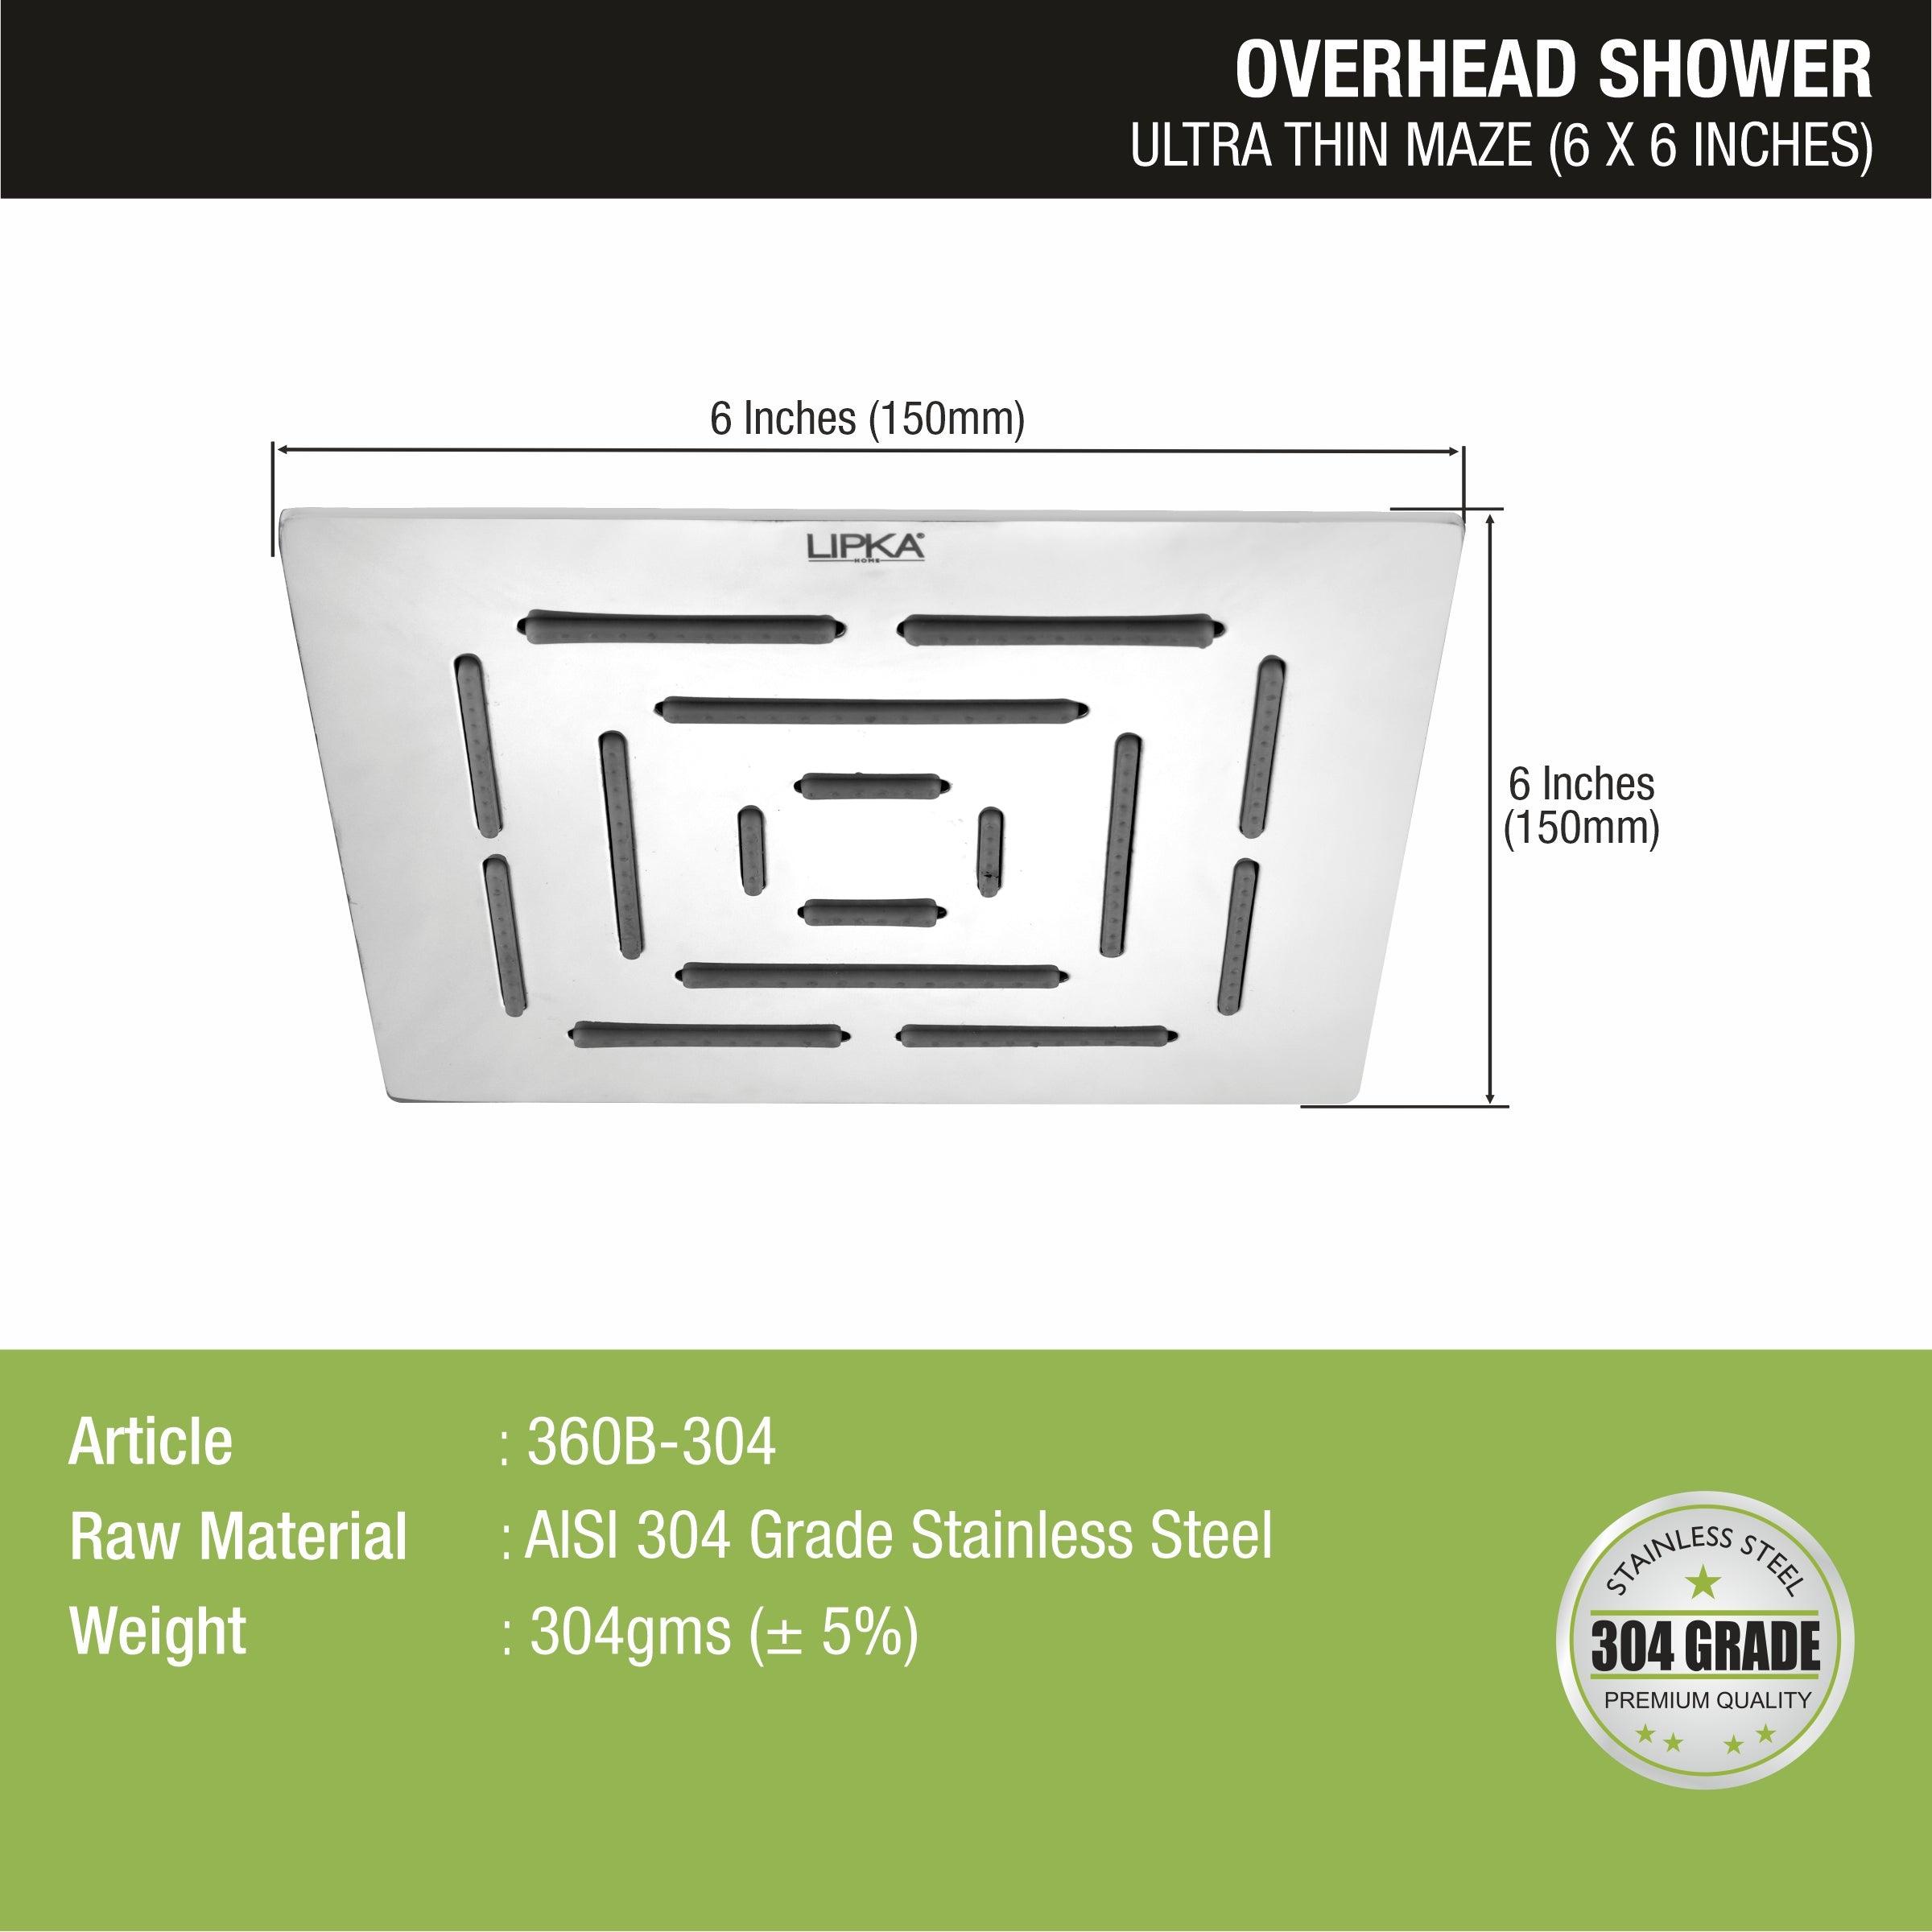 Ultra Thin Maze 304-Grade Overhead Rain Shower (6 x 6 Inches) sizes and dimensions